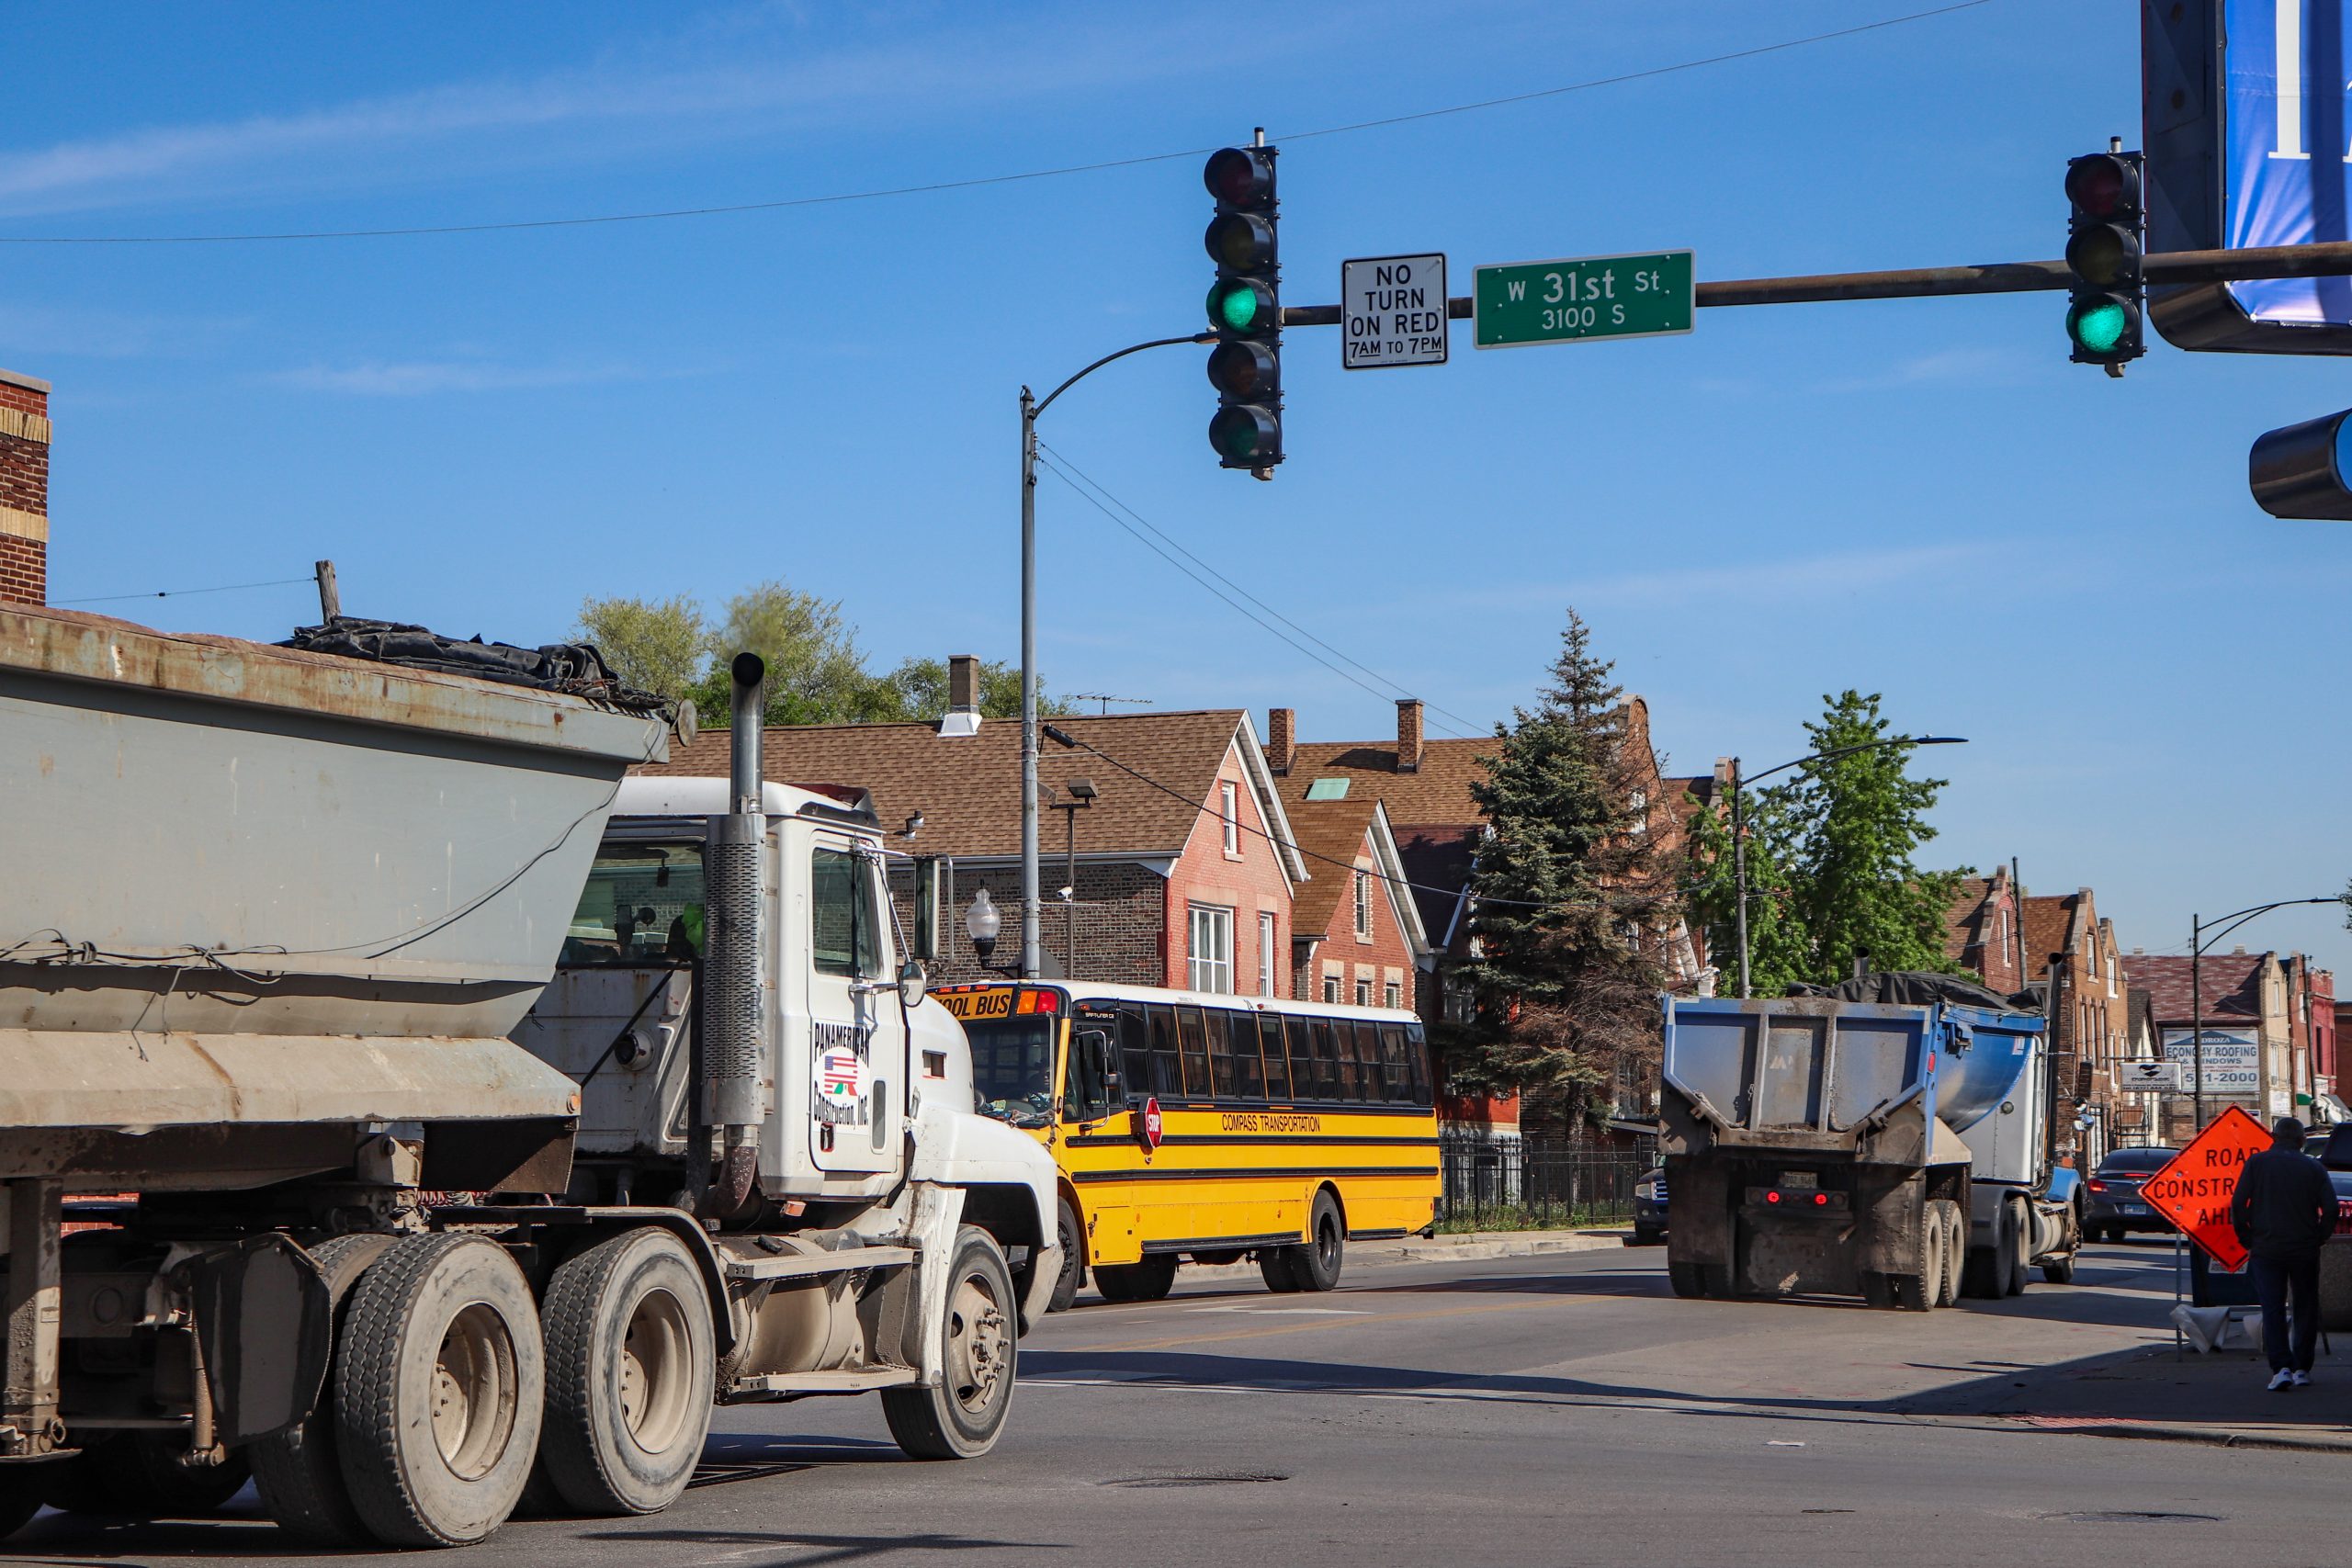 Counting trucks, demanding change: Chicago project aims to quantify heavy-duty vehicle impacts 